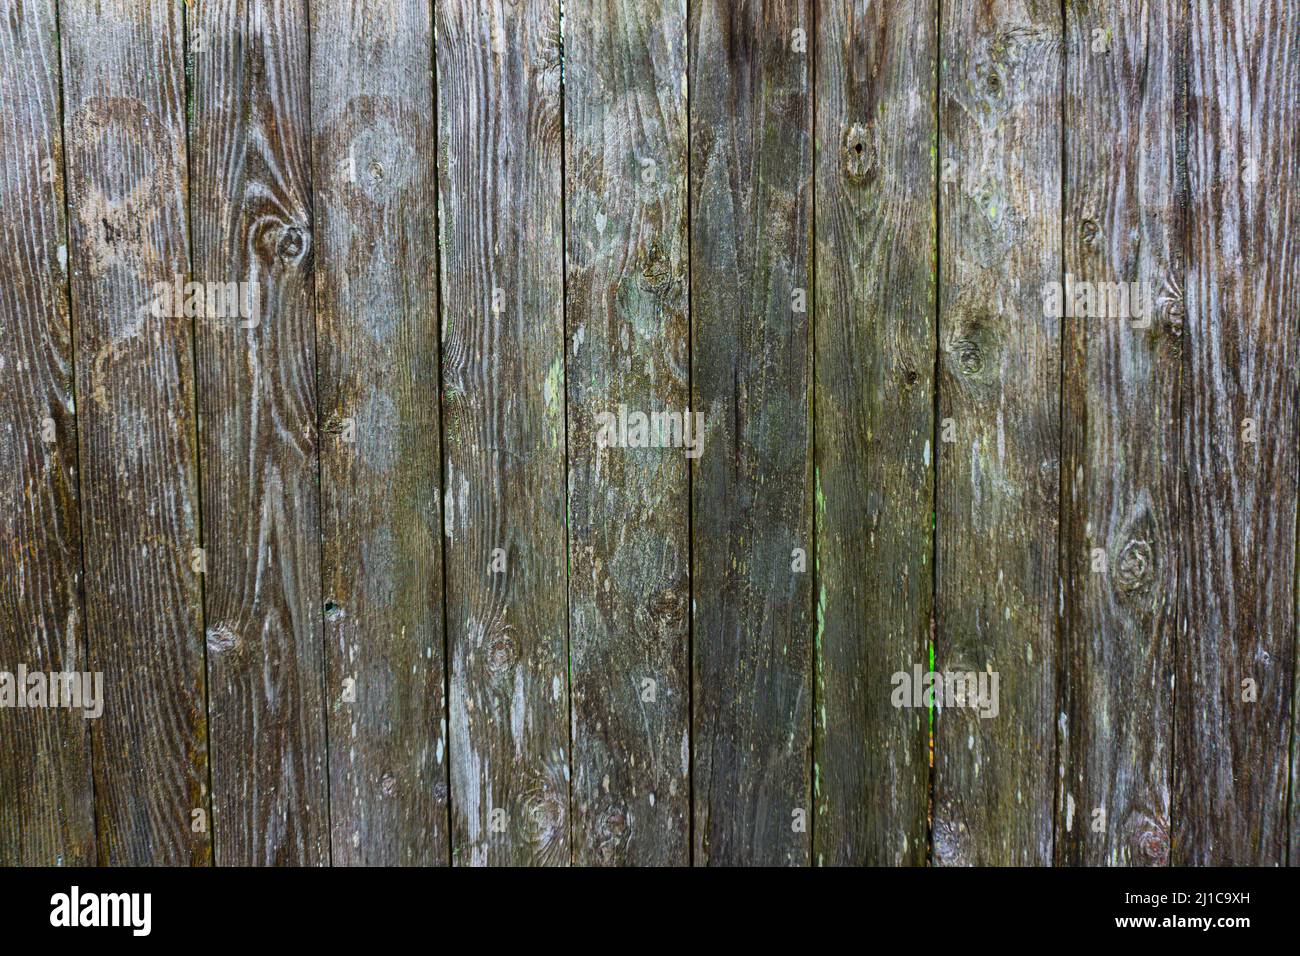 A wood texture of an old decaying fence with moss and water seeping into the wood surface. Stock Photo